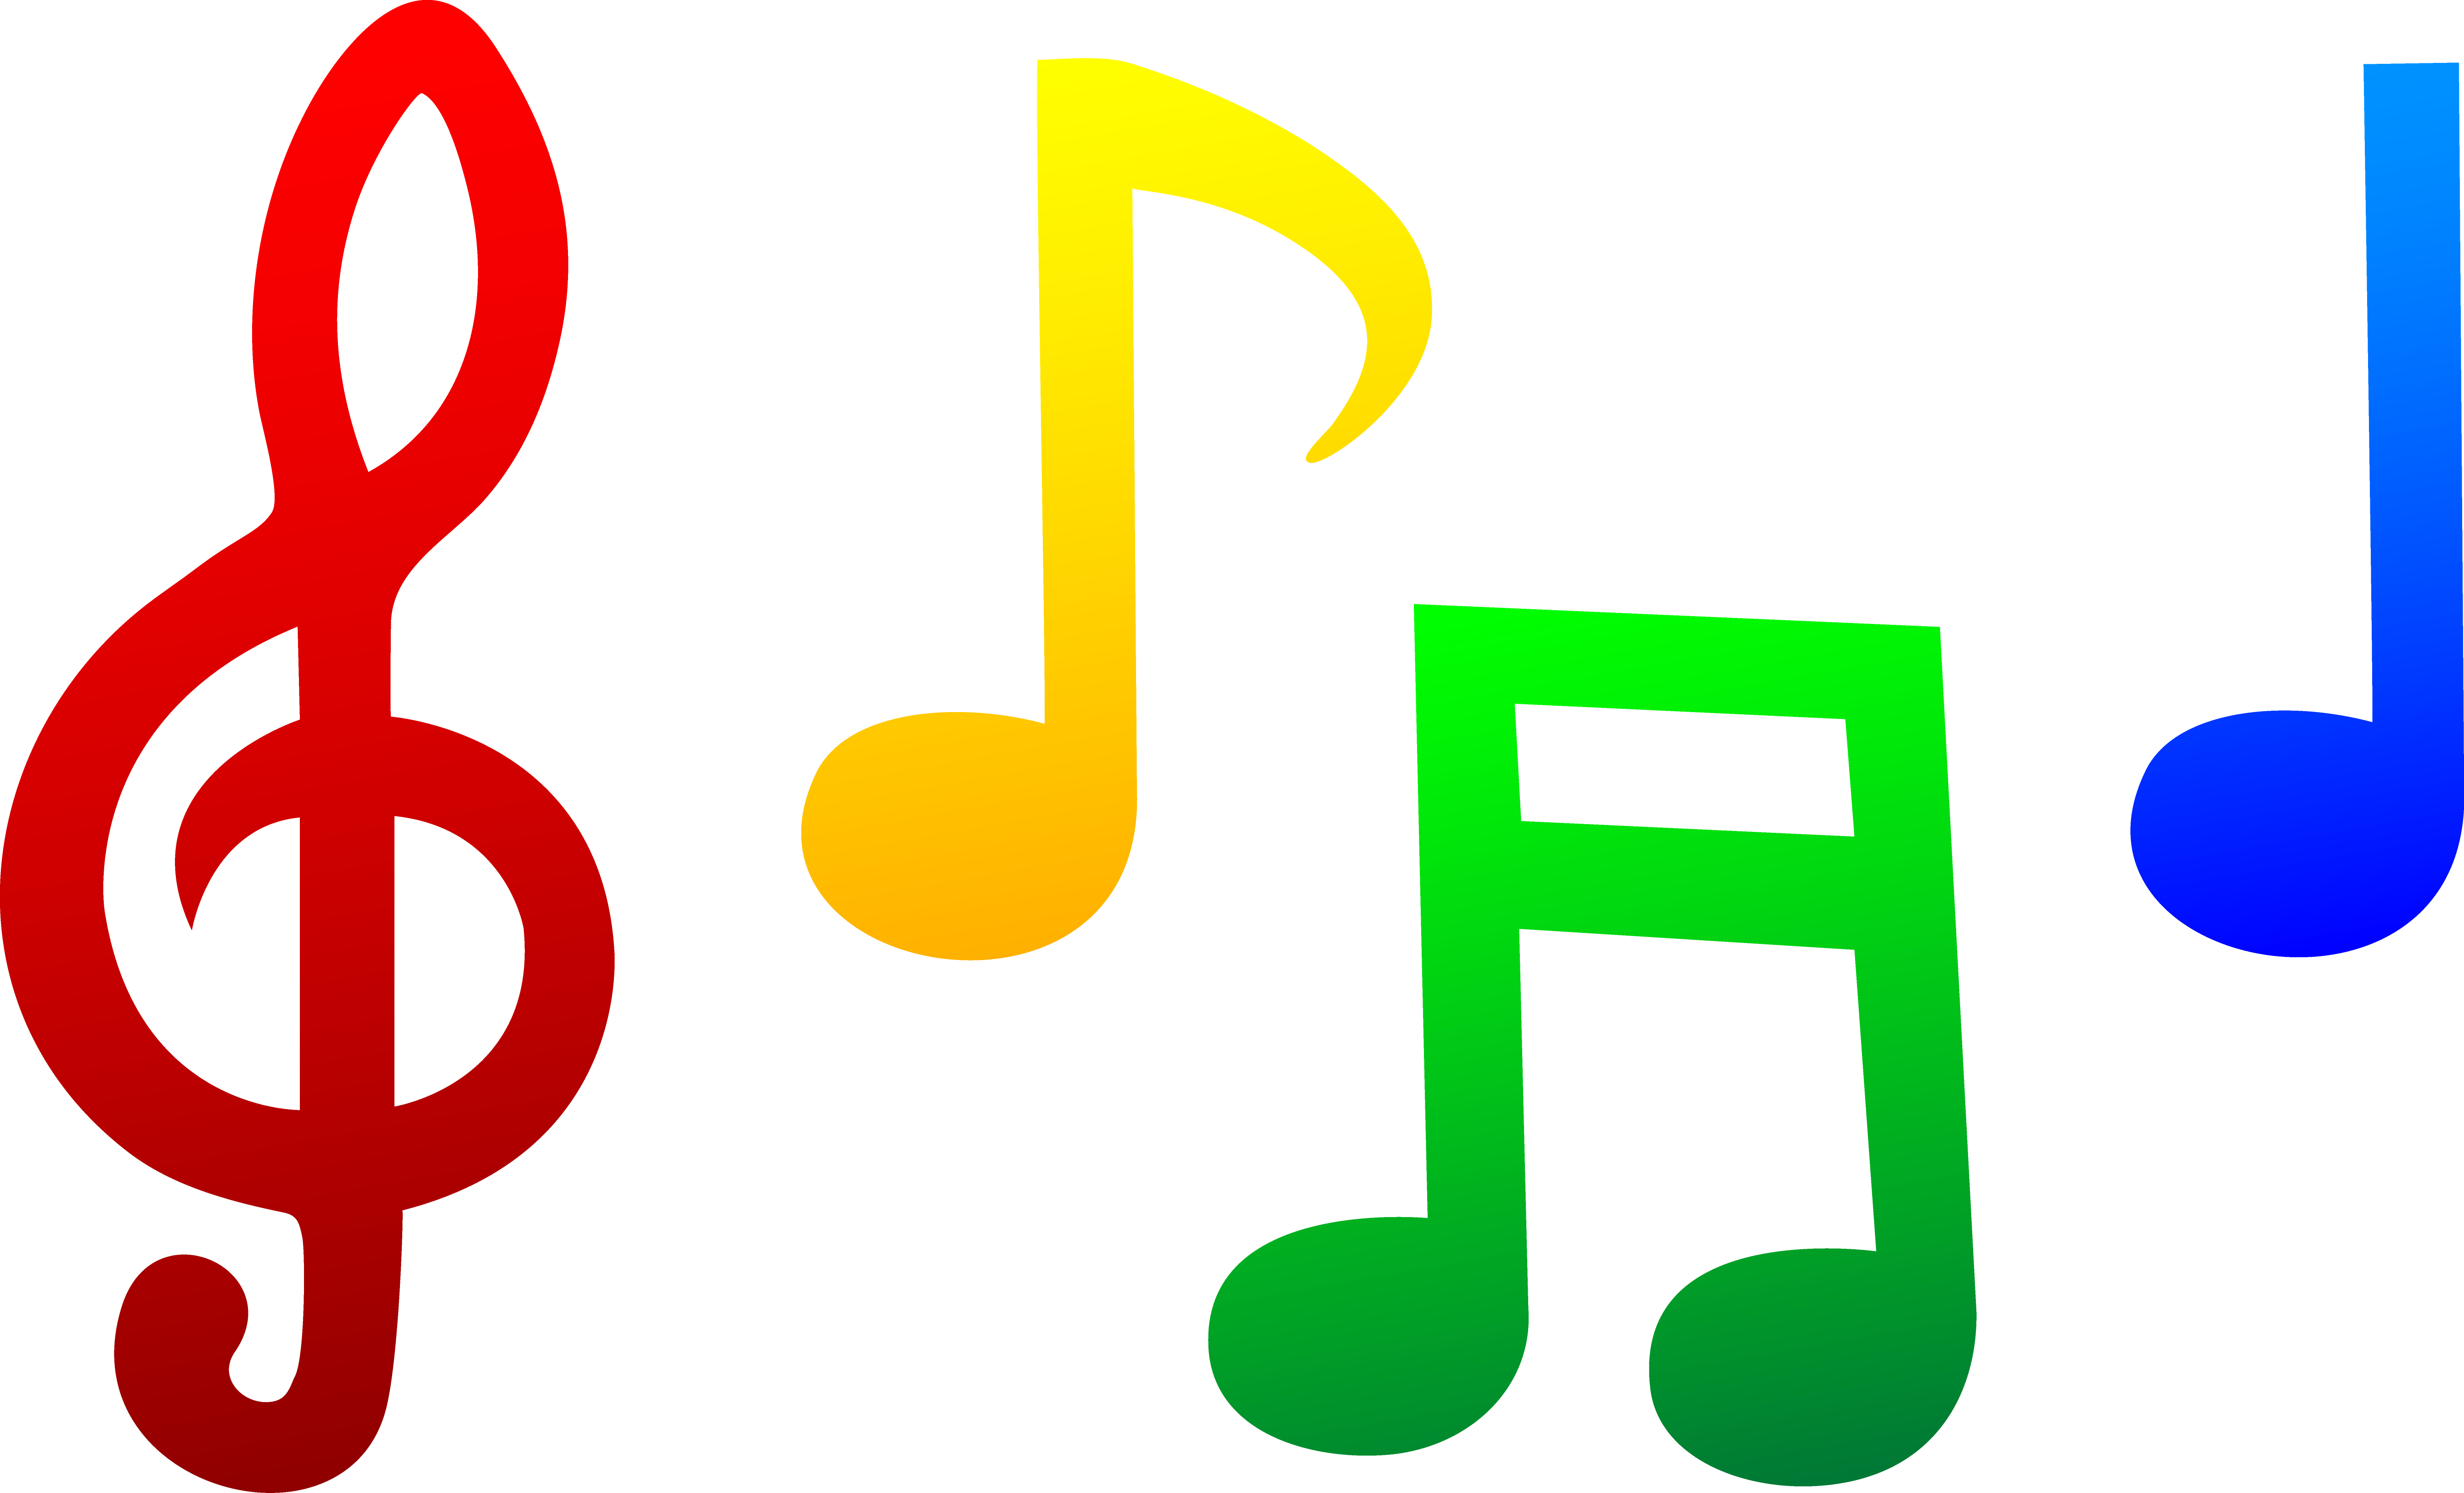 Free notes at getdrawings. Preschool clipart music